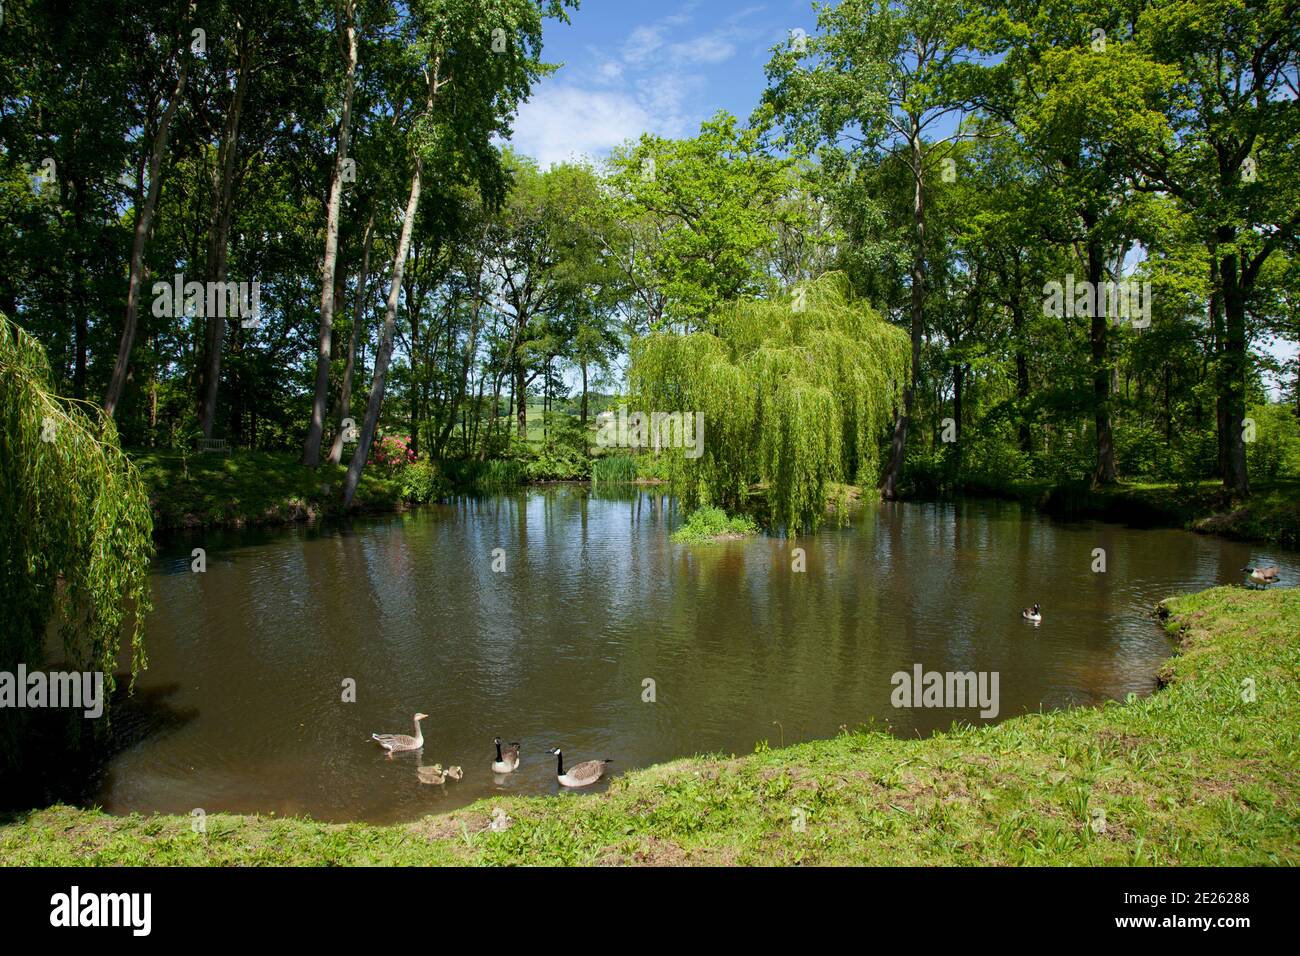 Large garden pond or lake with family of geese, surrounded by trees Stock Photo